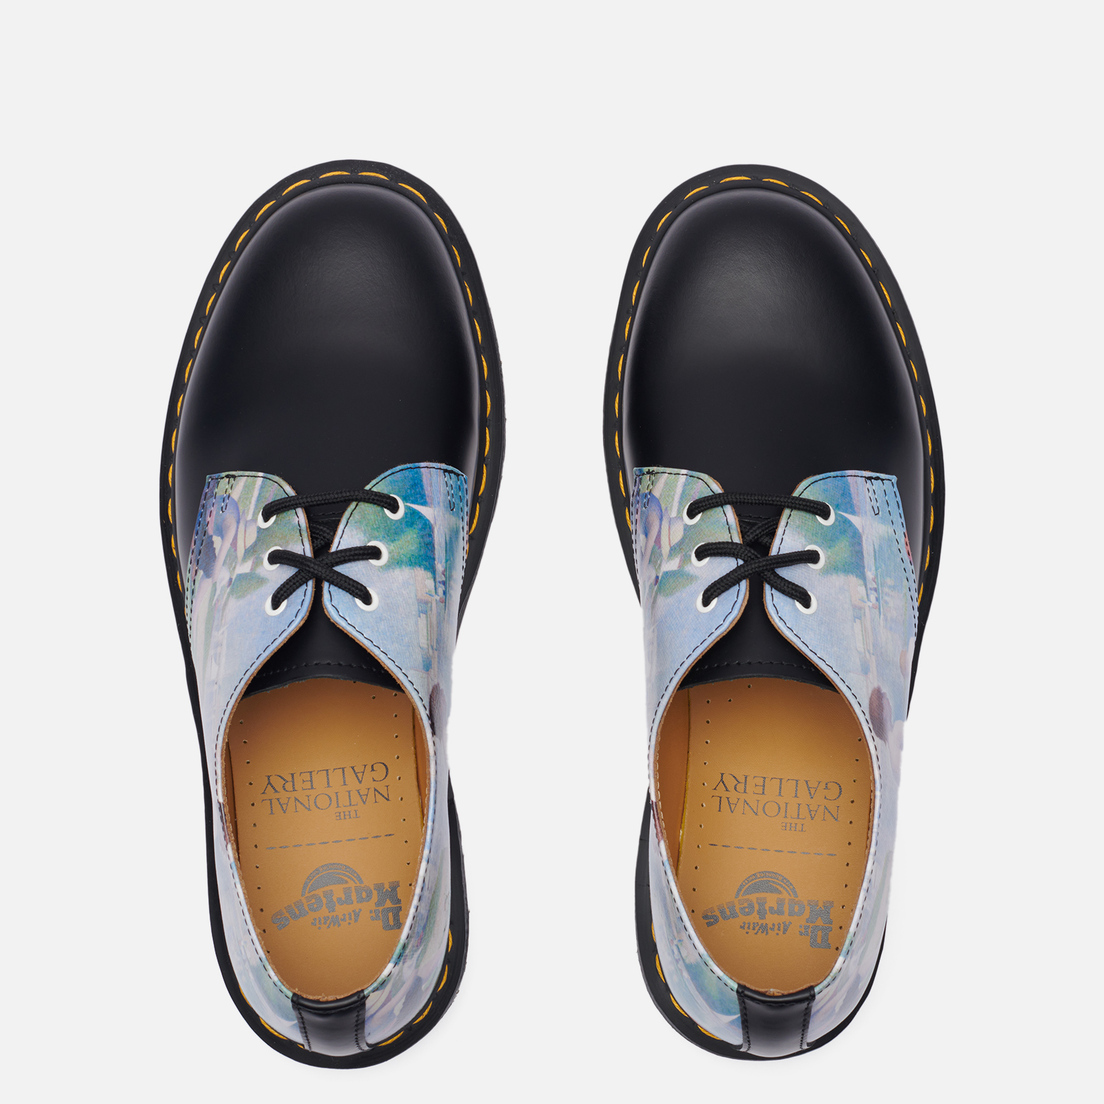 Dr. Martens Ботинки x The National Gallery 1461 Bathers